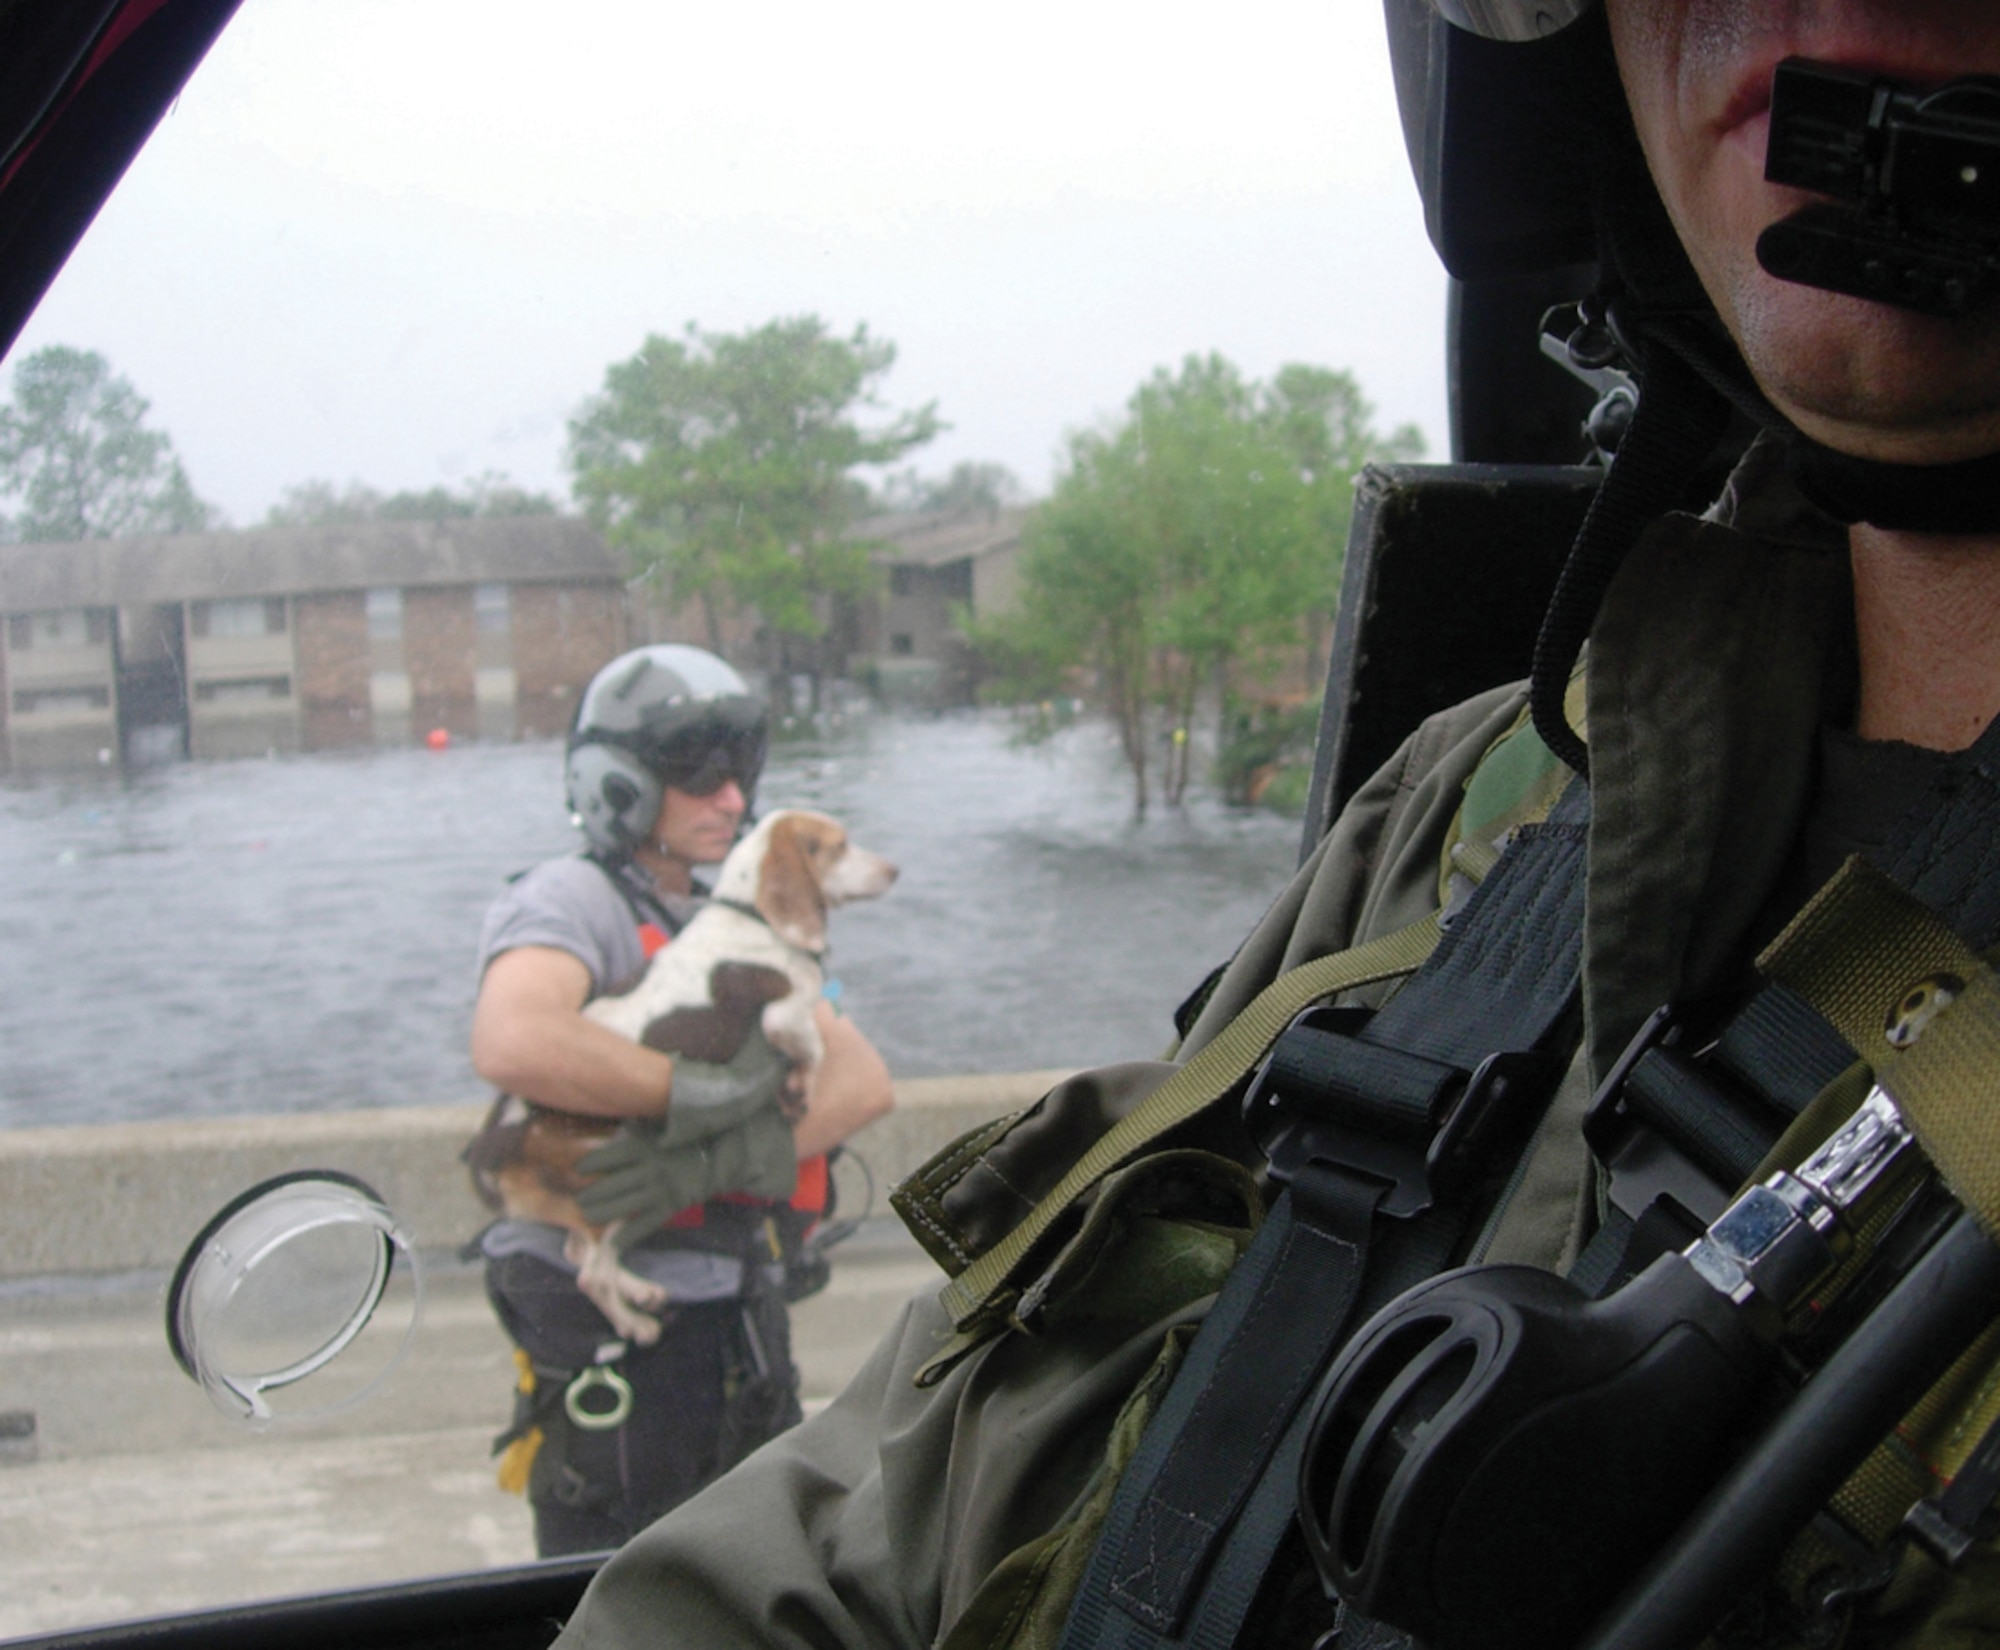 NEW ORLEANS, La.- Surrounded by flood waters, Senior Master Sgt. Pete Callina rescues the stranded beagle from the I-10 overpass. The dog assisted Sergeant Callina, a pararescueman with the 308th Rescue Squadron, by shepparding hurricane victims into waiting 920th Rescue Wing helicopters Sept 1, 2015. (U.S. Air Force file photo)
